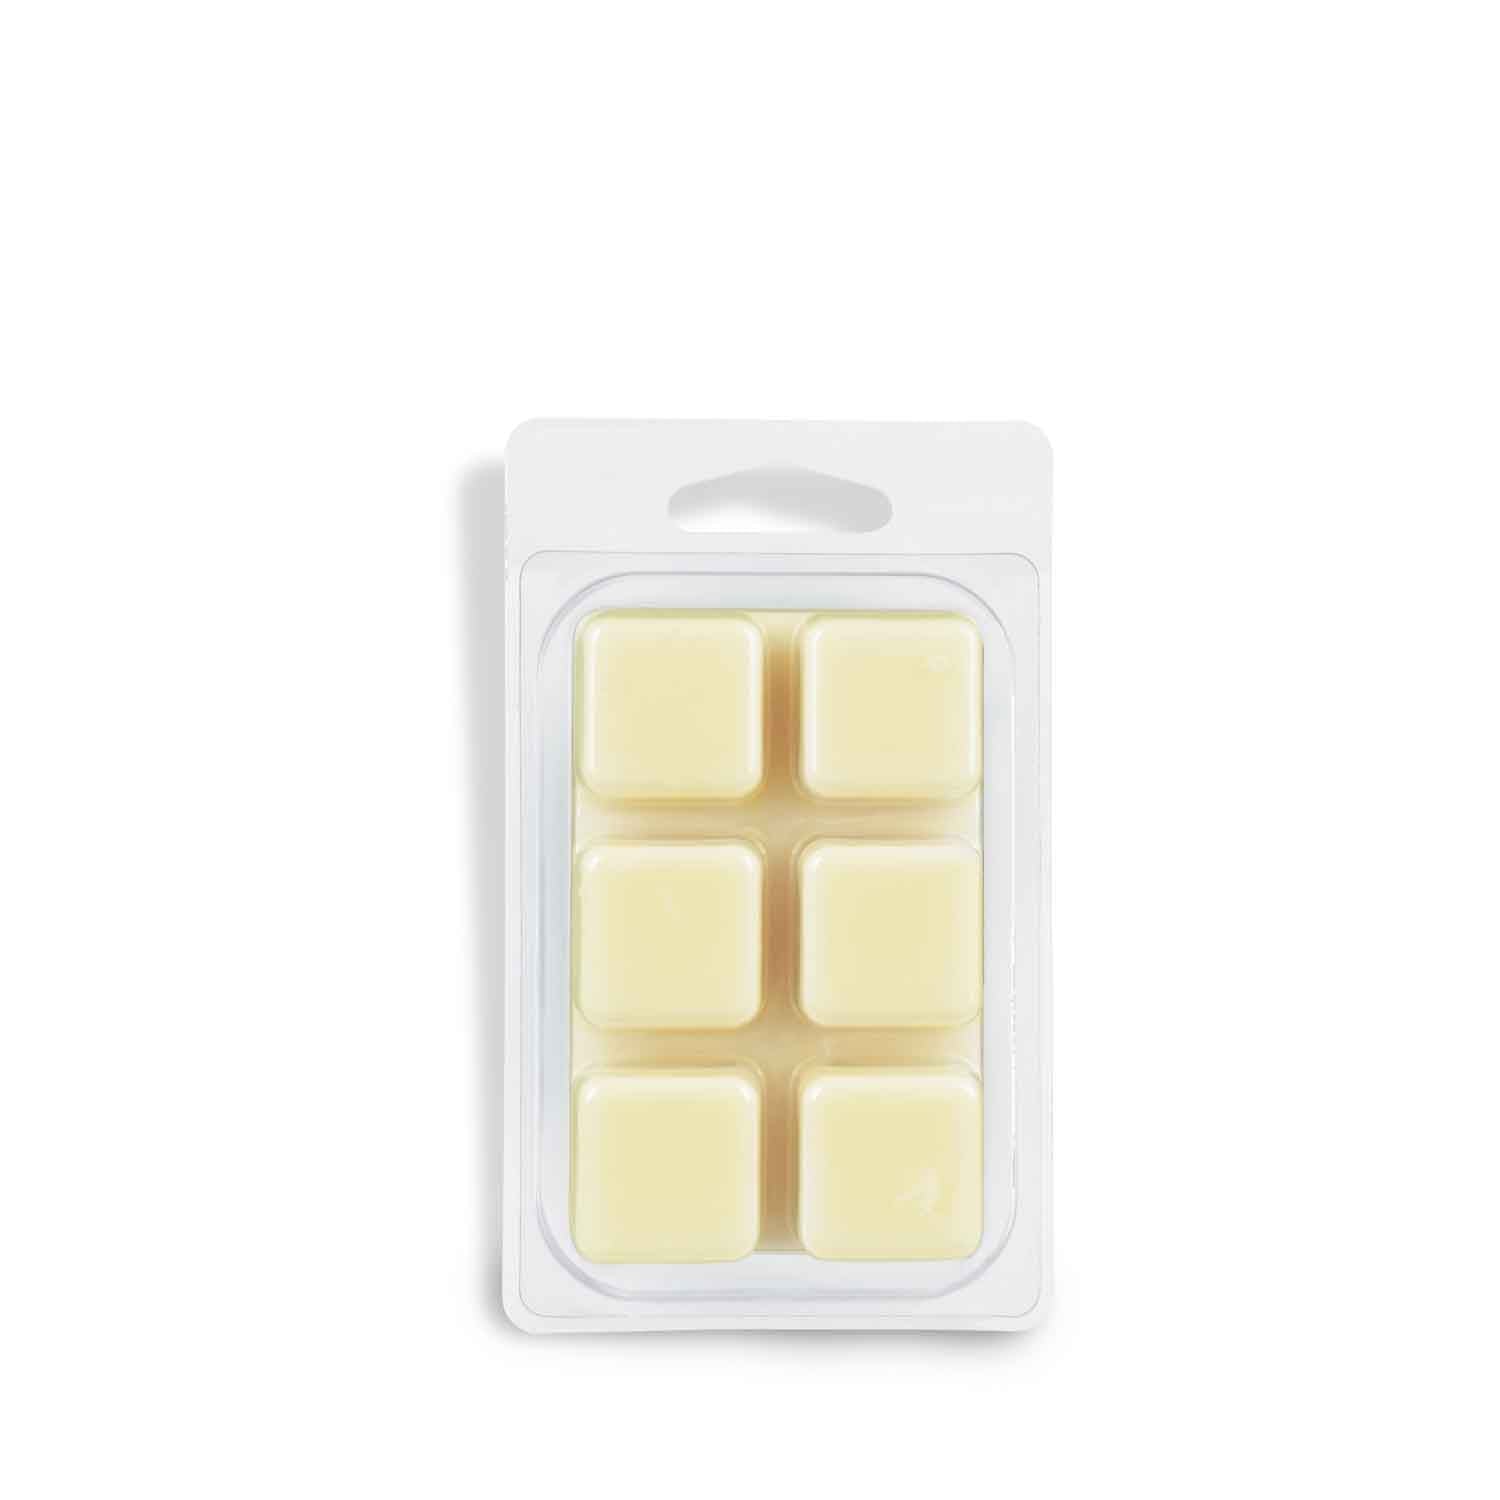 A pack of Grandma's Sugar Cookies Scented Wax Melt (2.5 oz) squares in a white package by Tuscany Candle®.